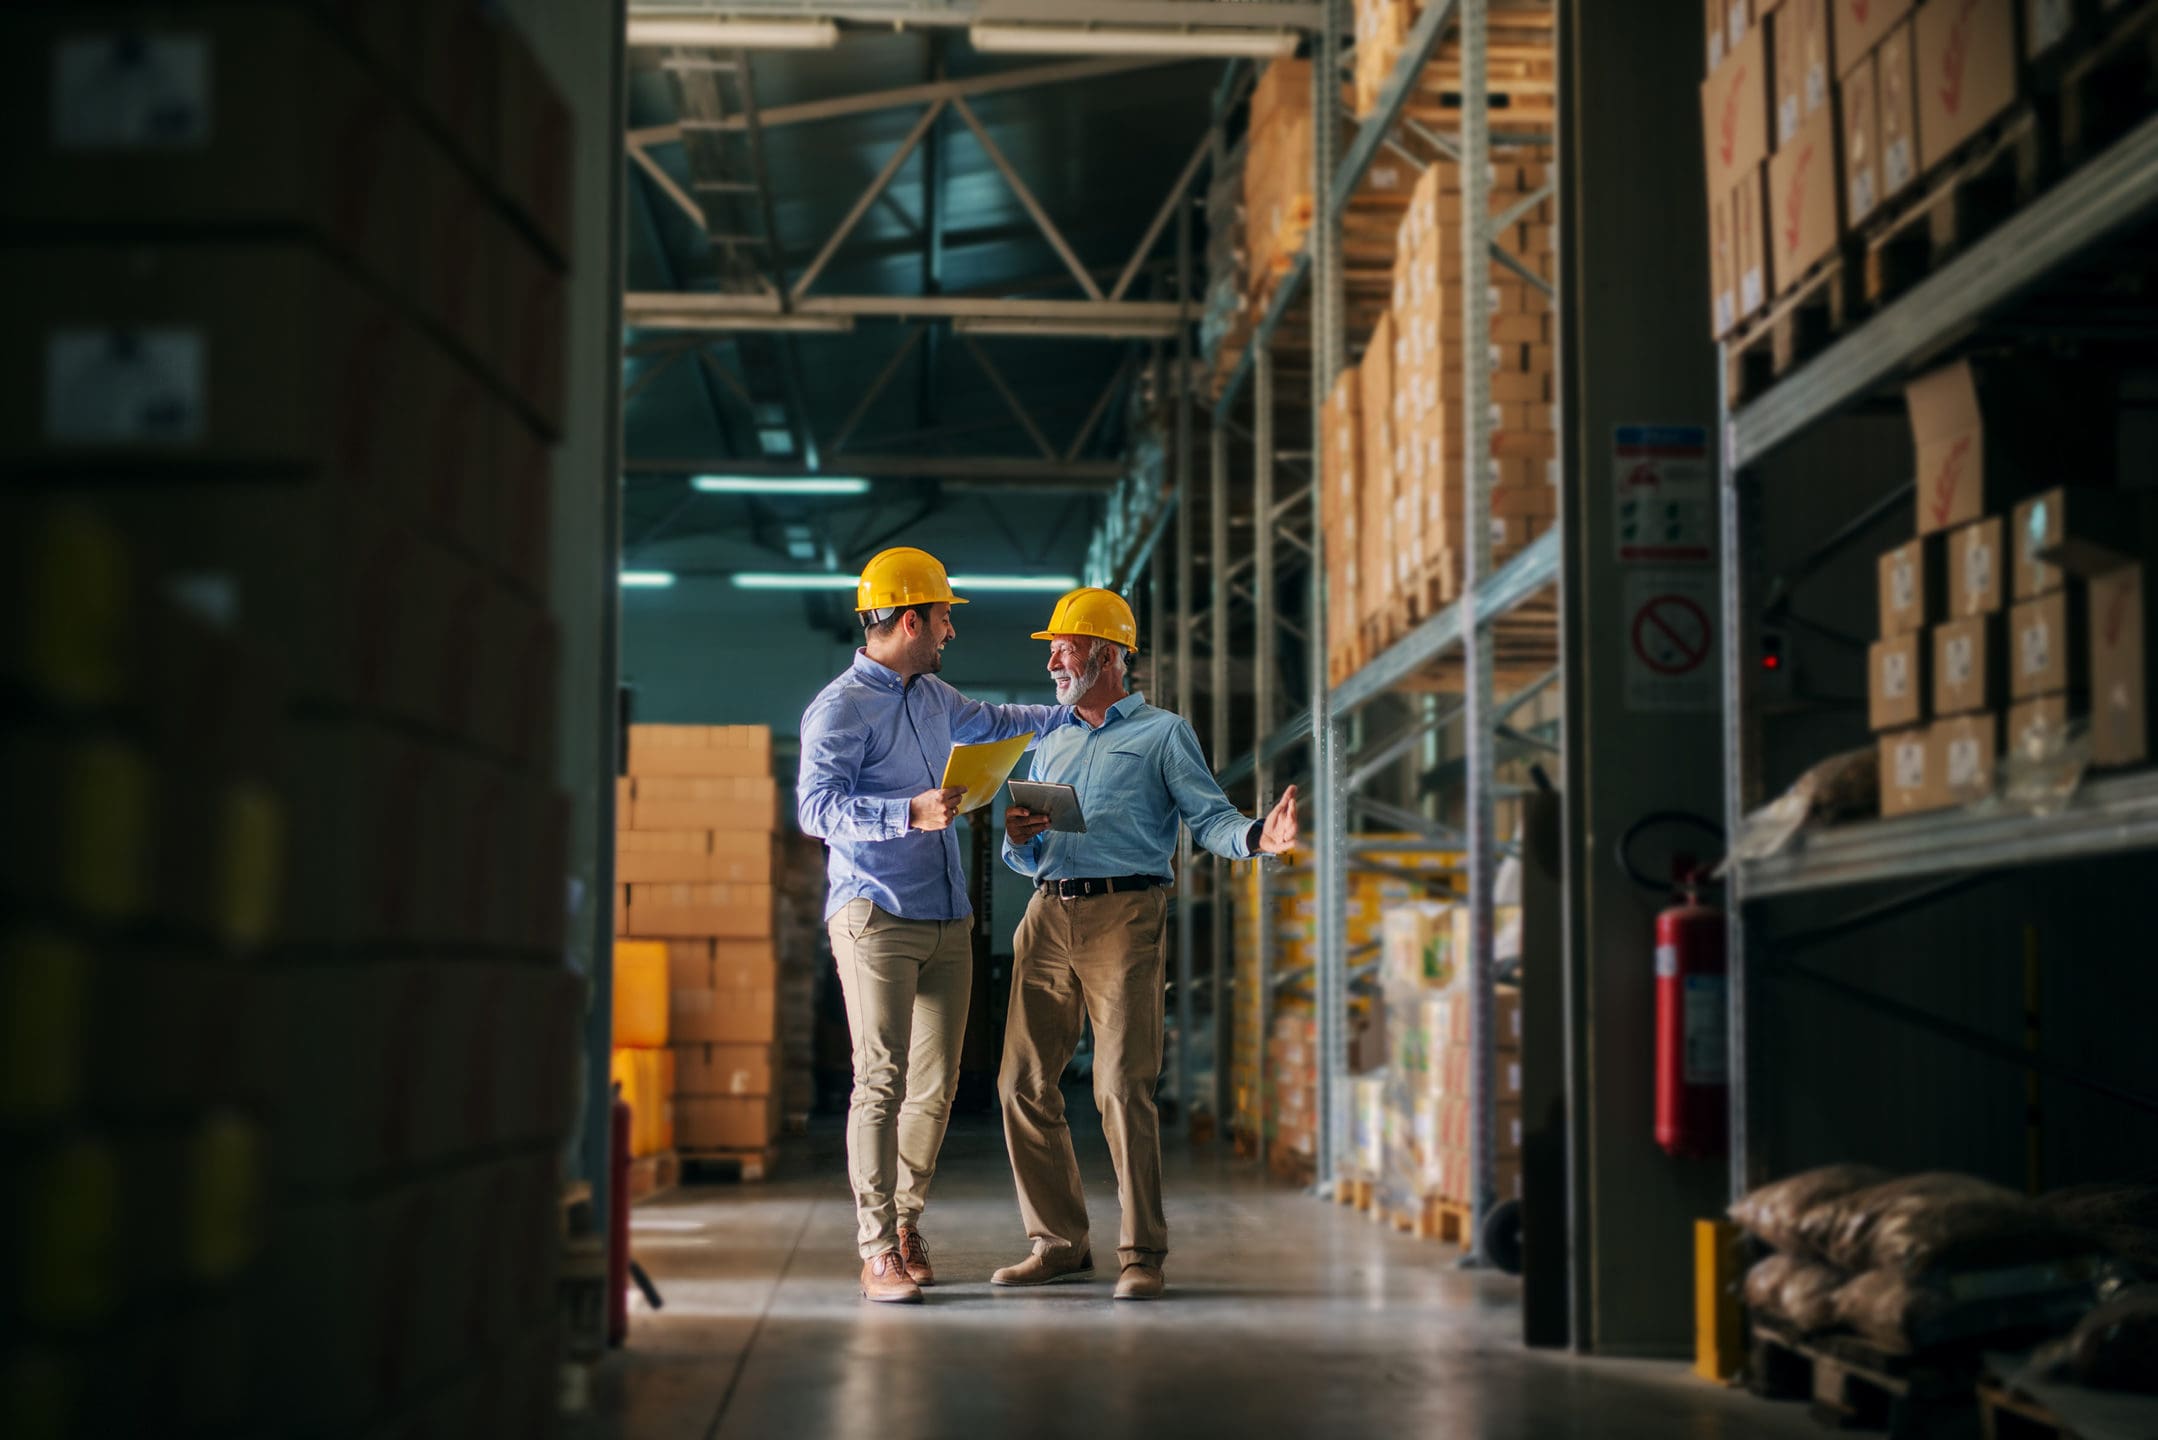 Two men in hard hats smiling and conversing in a warehouse